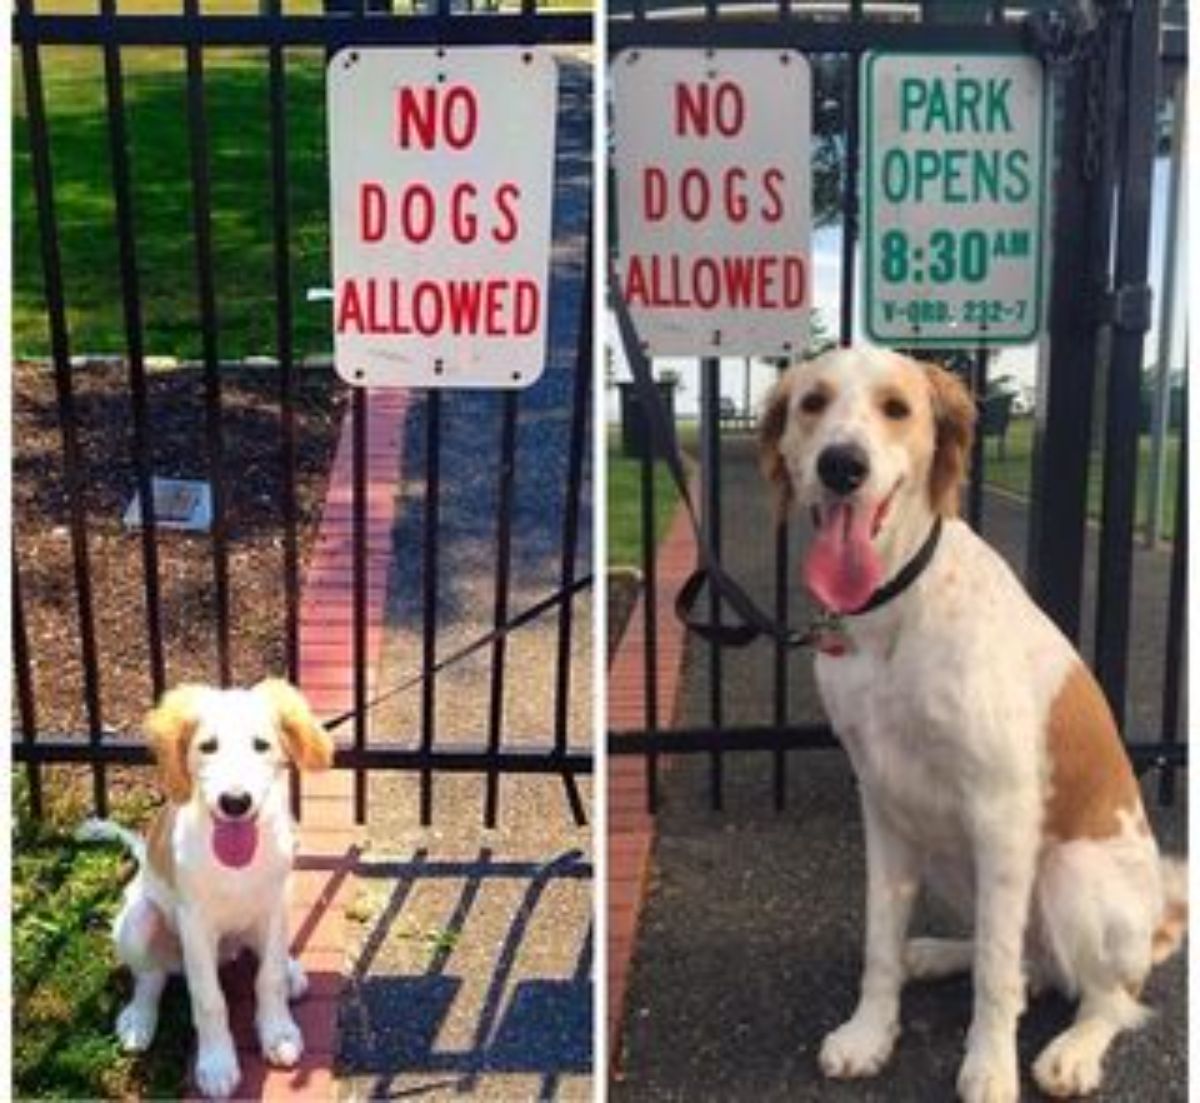 brown and white puppy sitting by a gate with a NO DOGS ALLOWED sign with the same dog grown up by the same gate with the same sign